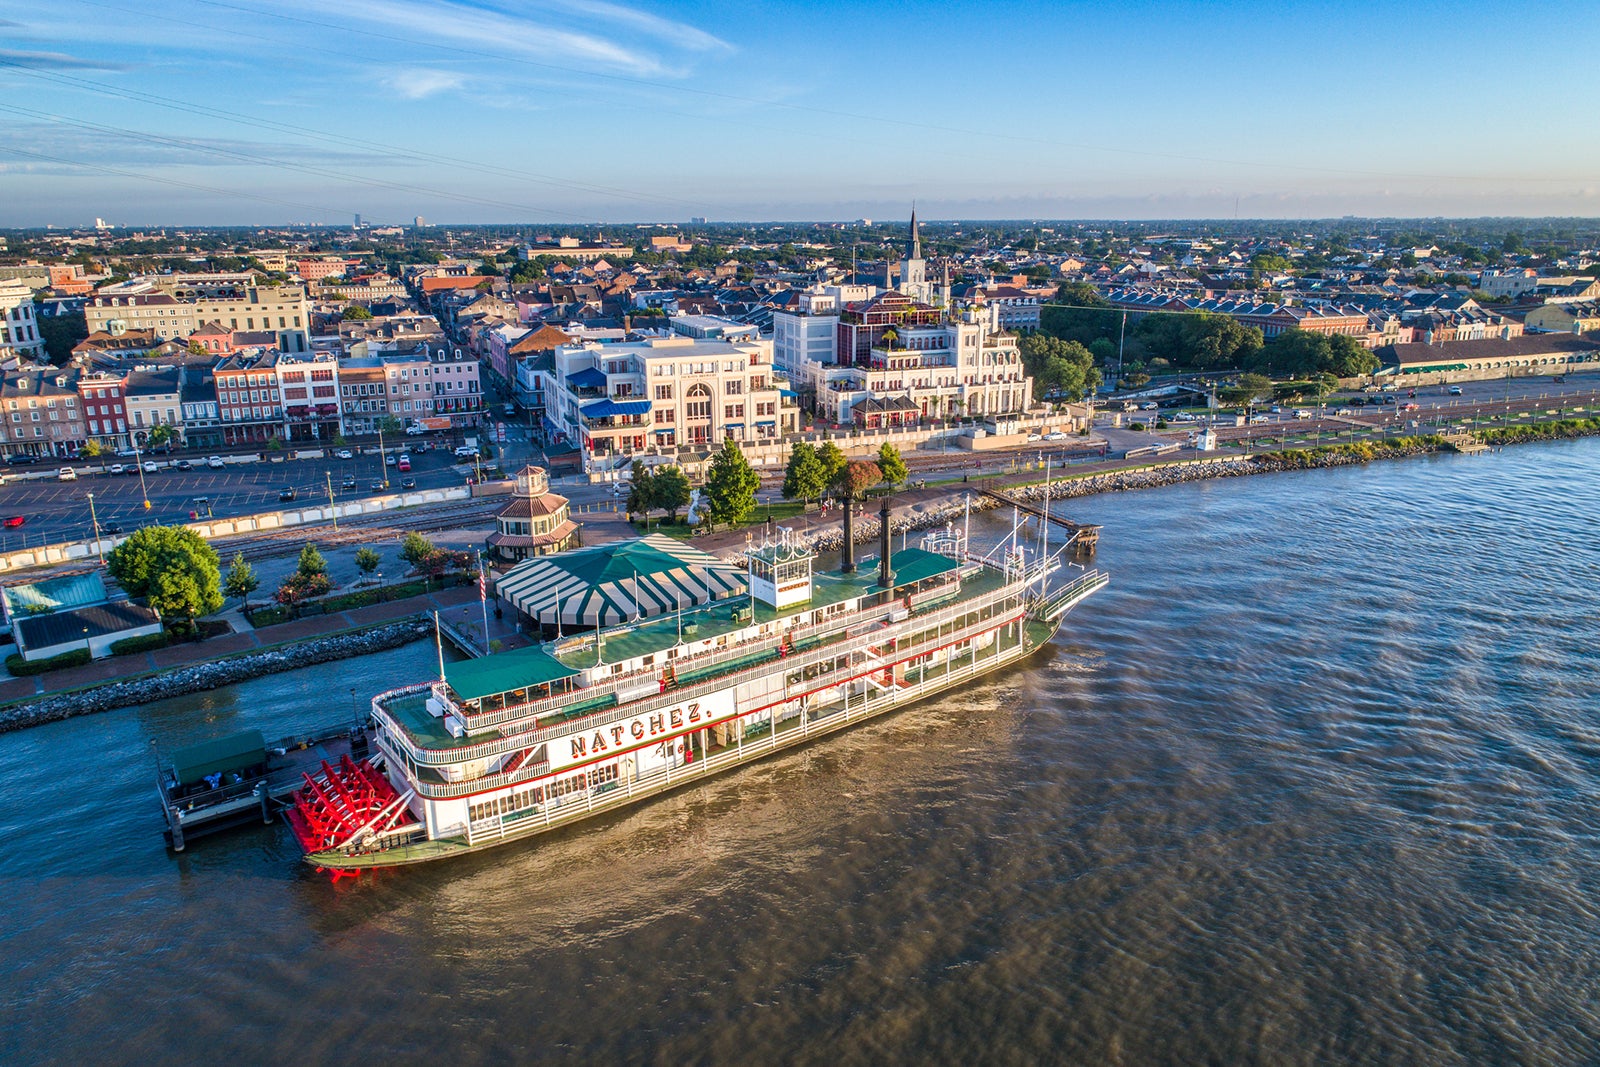 mississippi river cruise 4 day